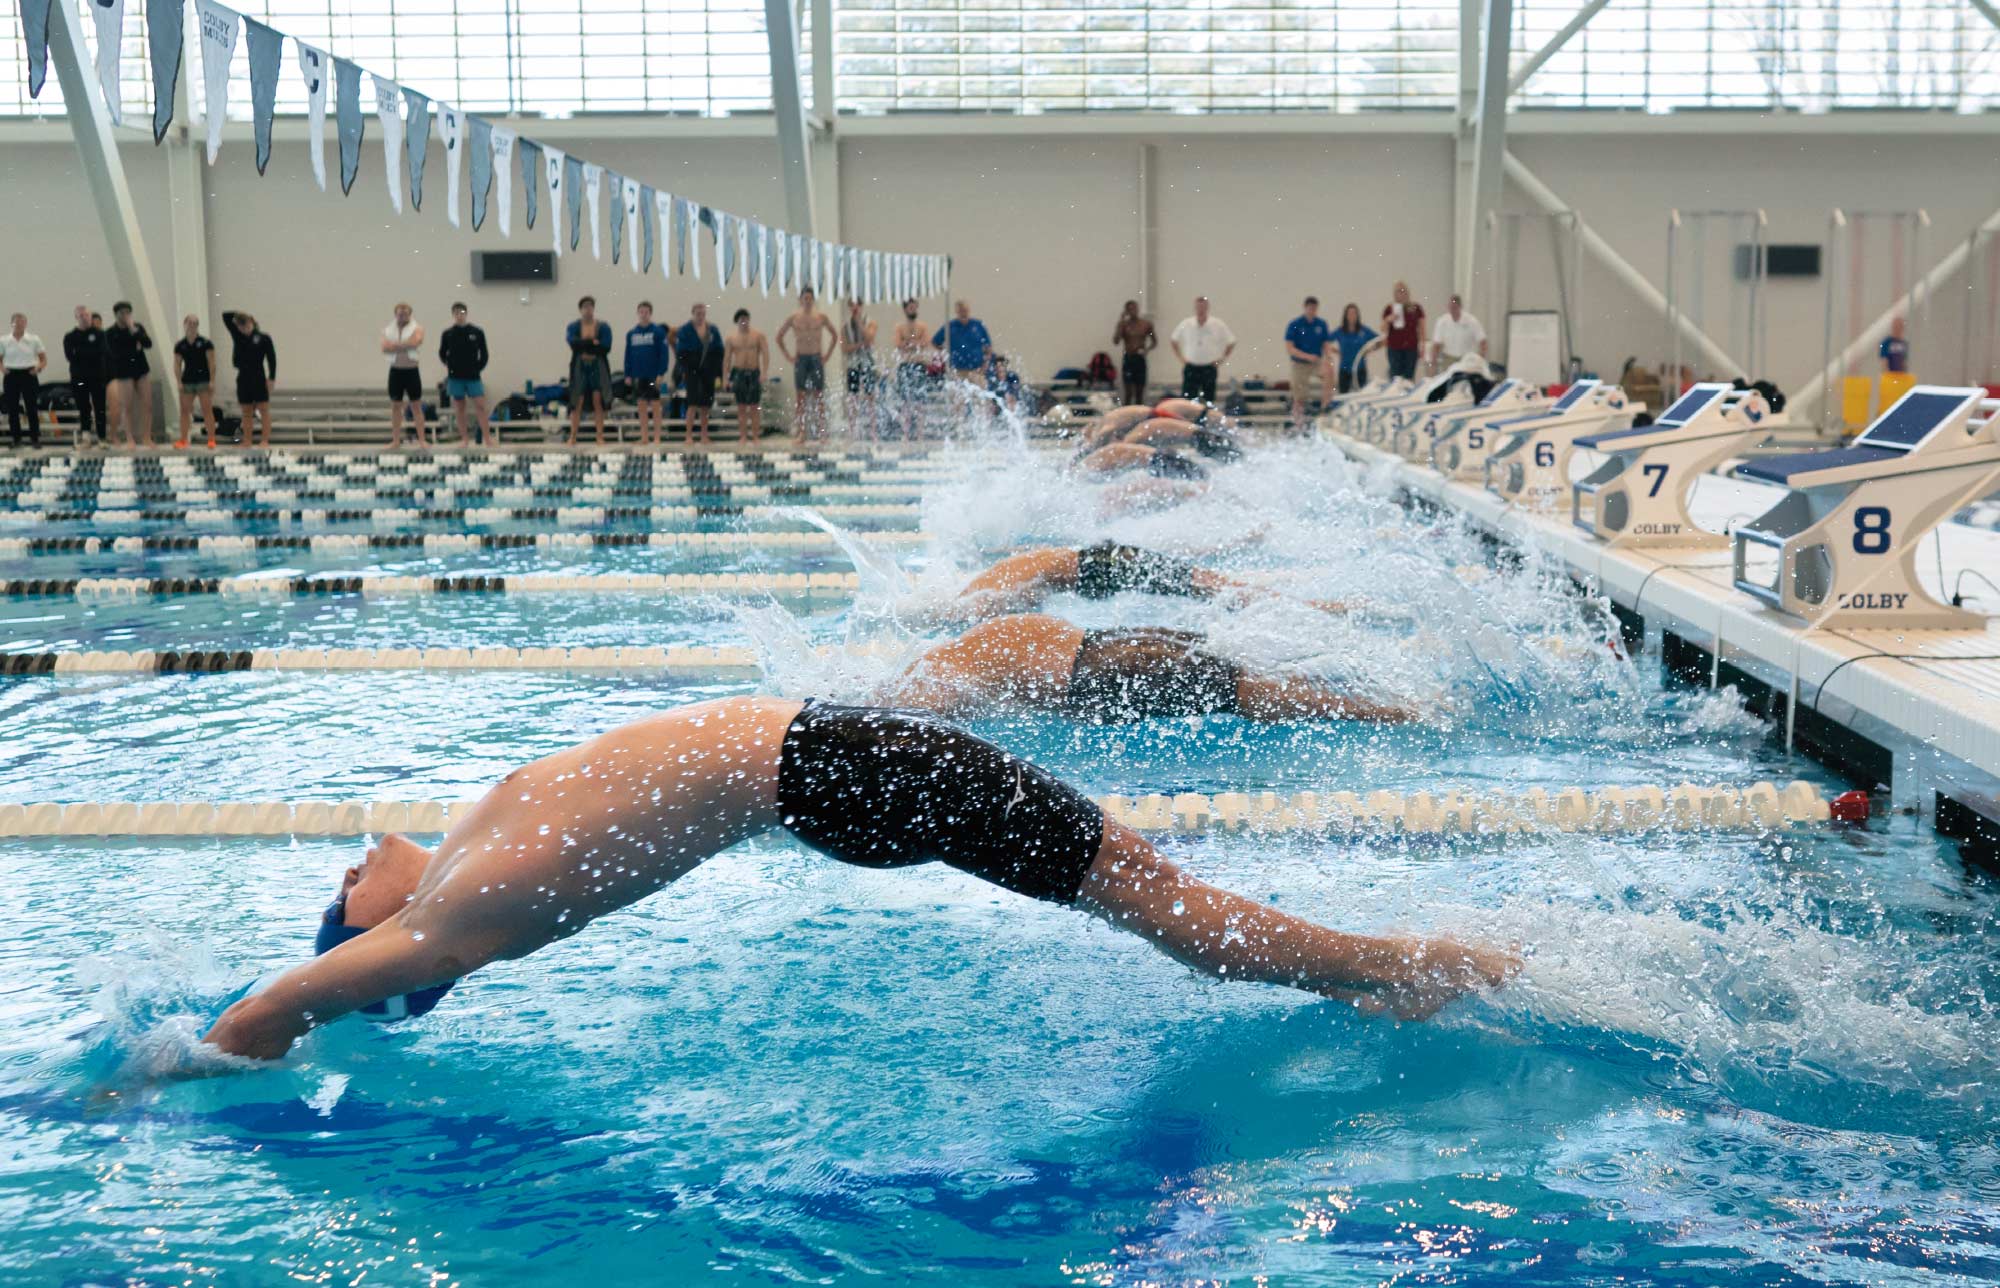 swimmers mid-race at the NESCAC Swimming and Diving Championships at its new Myrtha pool